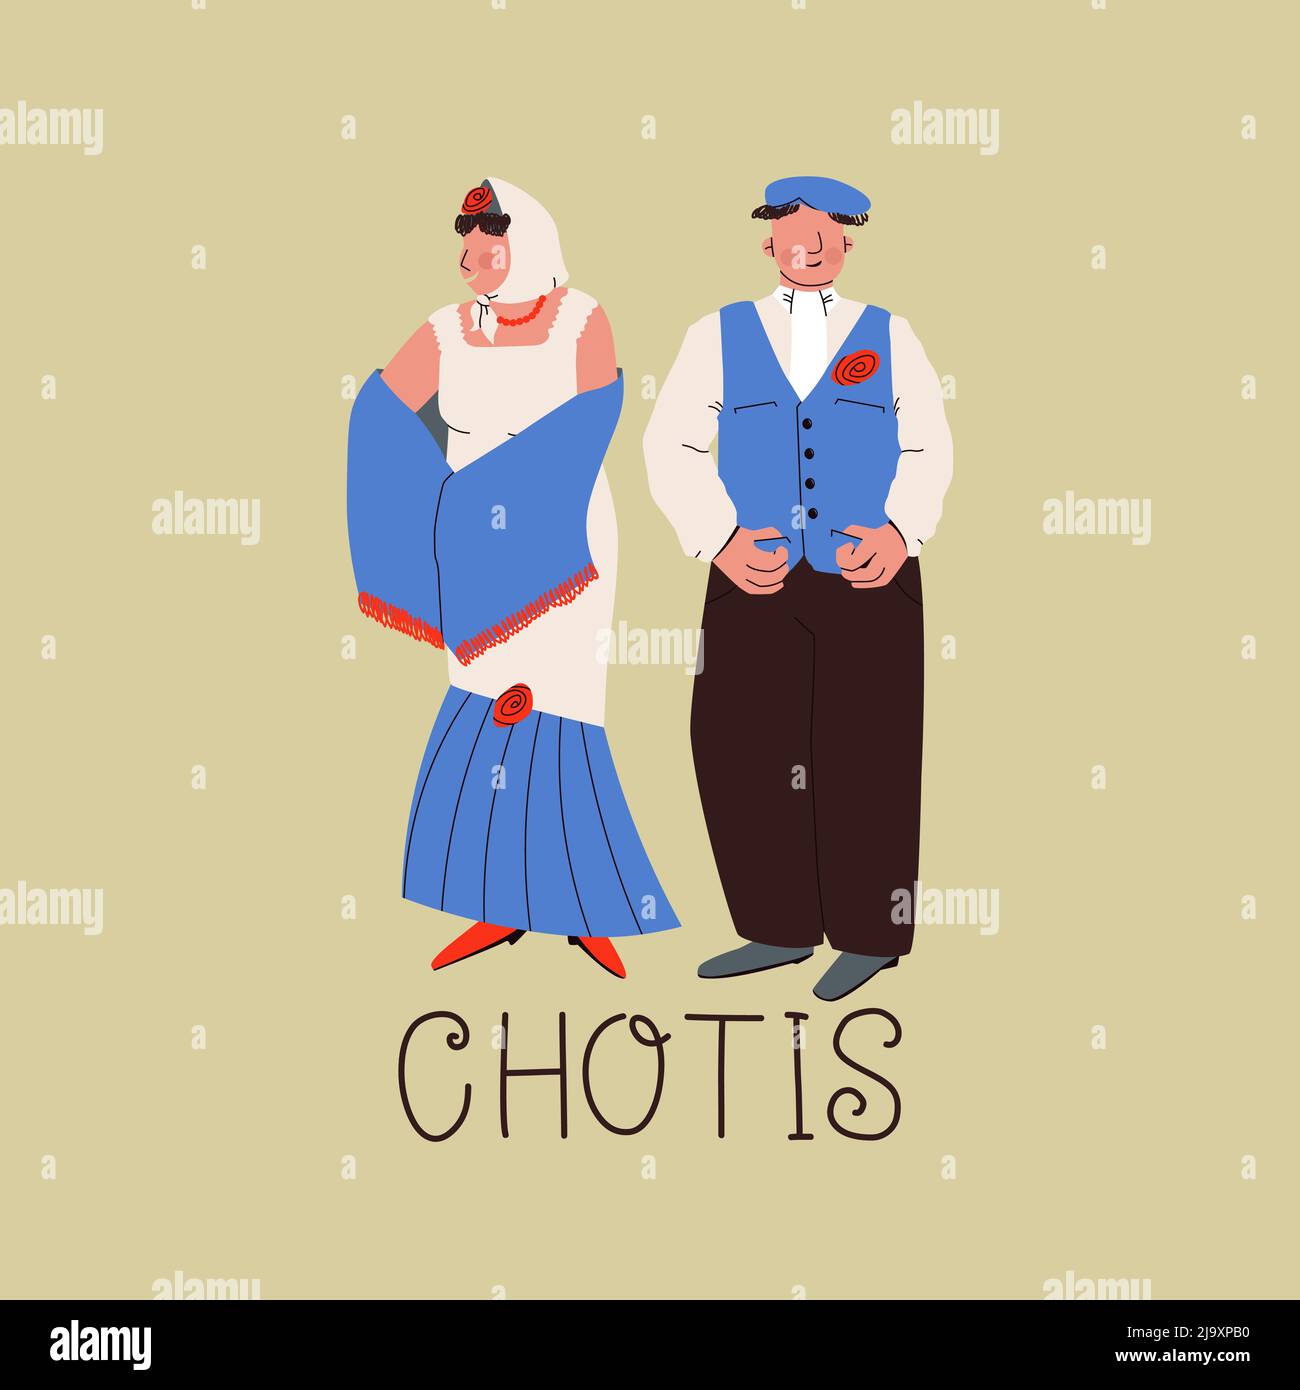 Madrid dance chotis. Man and woman in traditional Spanish dance costumes. Typical for the festival of San Isidro. Vector illustration. Stock Vector